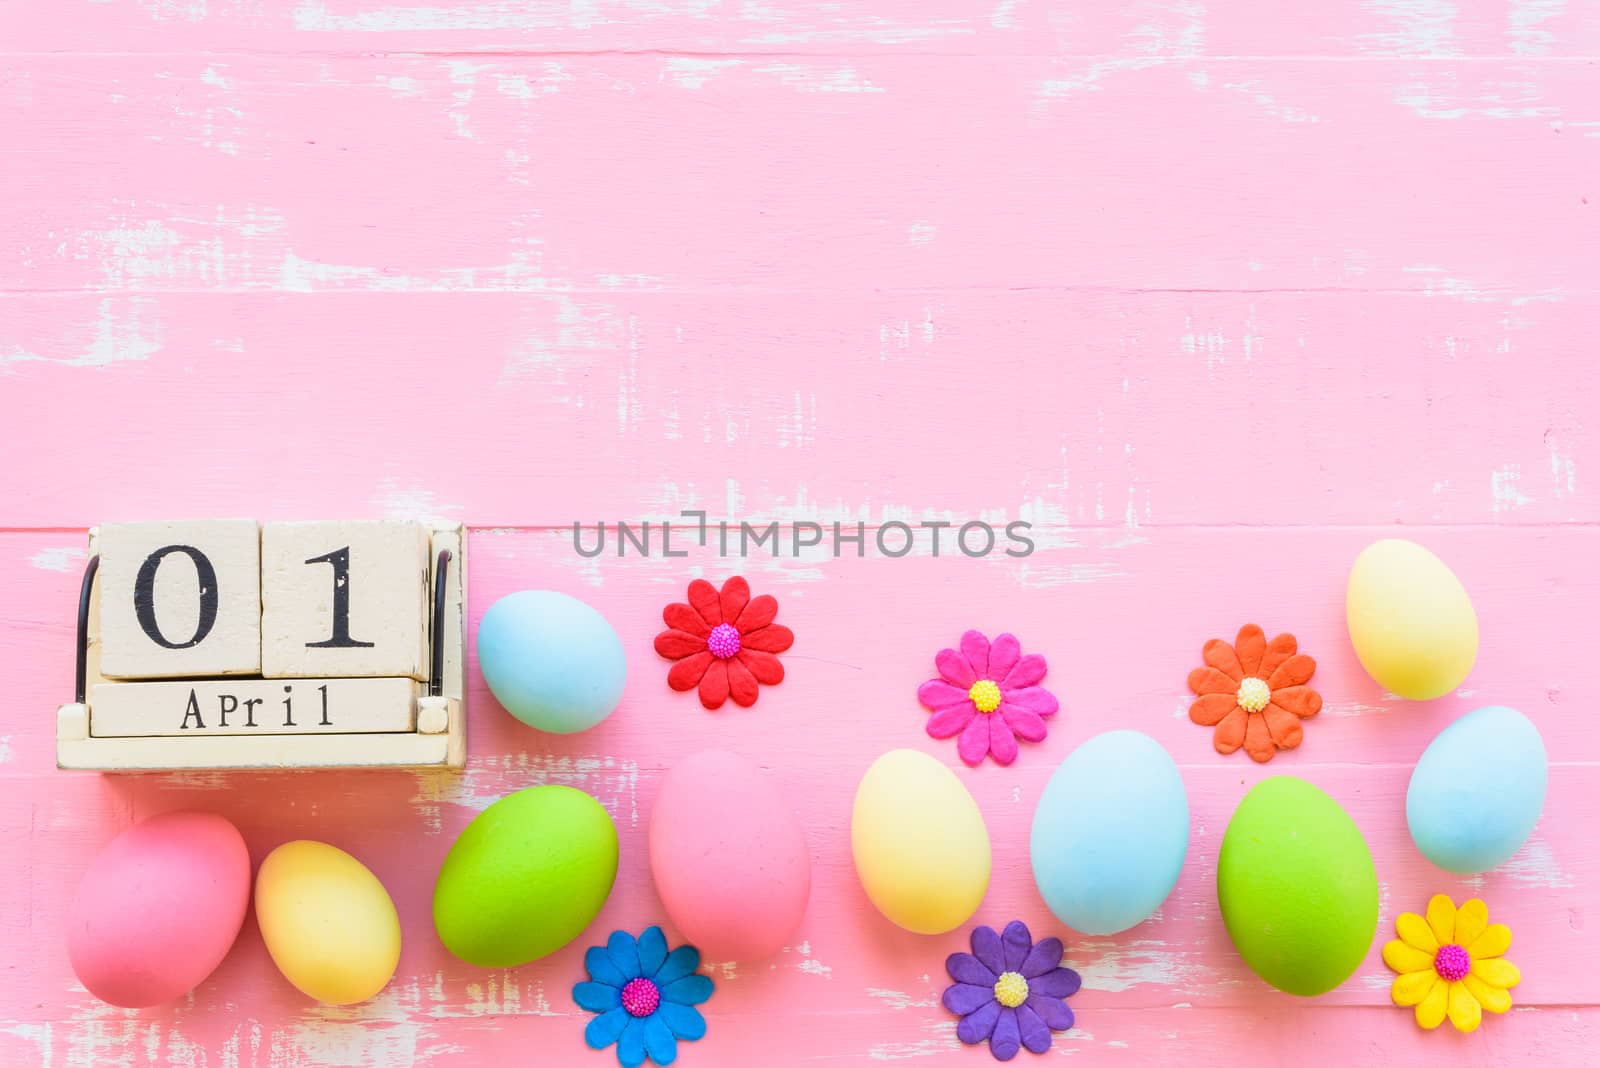 Wooden block calendar for Easter Day, April 1. Row Easter eggs with colorful paper flowers and red ribbon on bright pink and white wooden background.